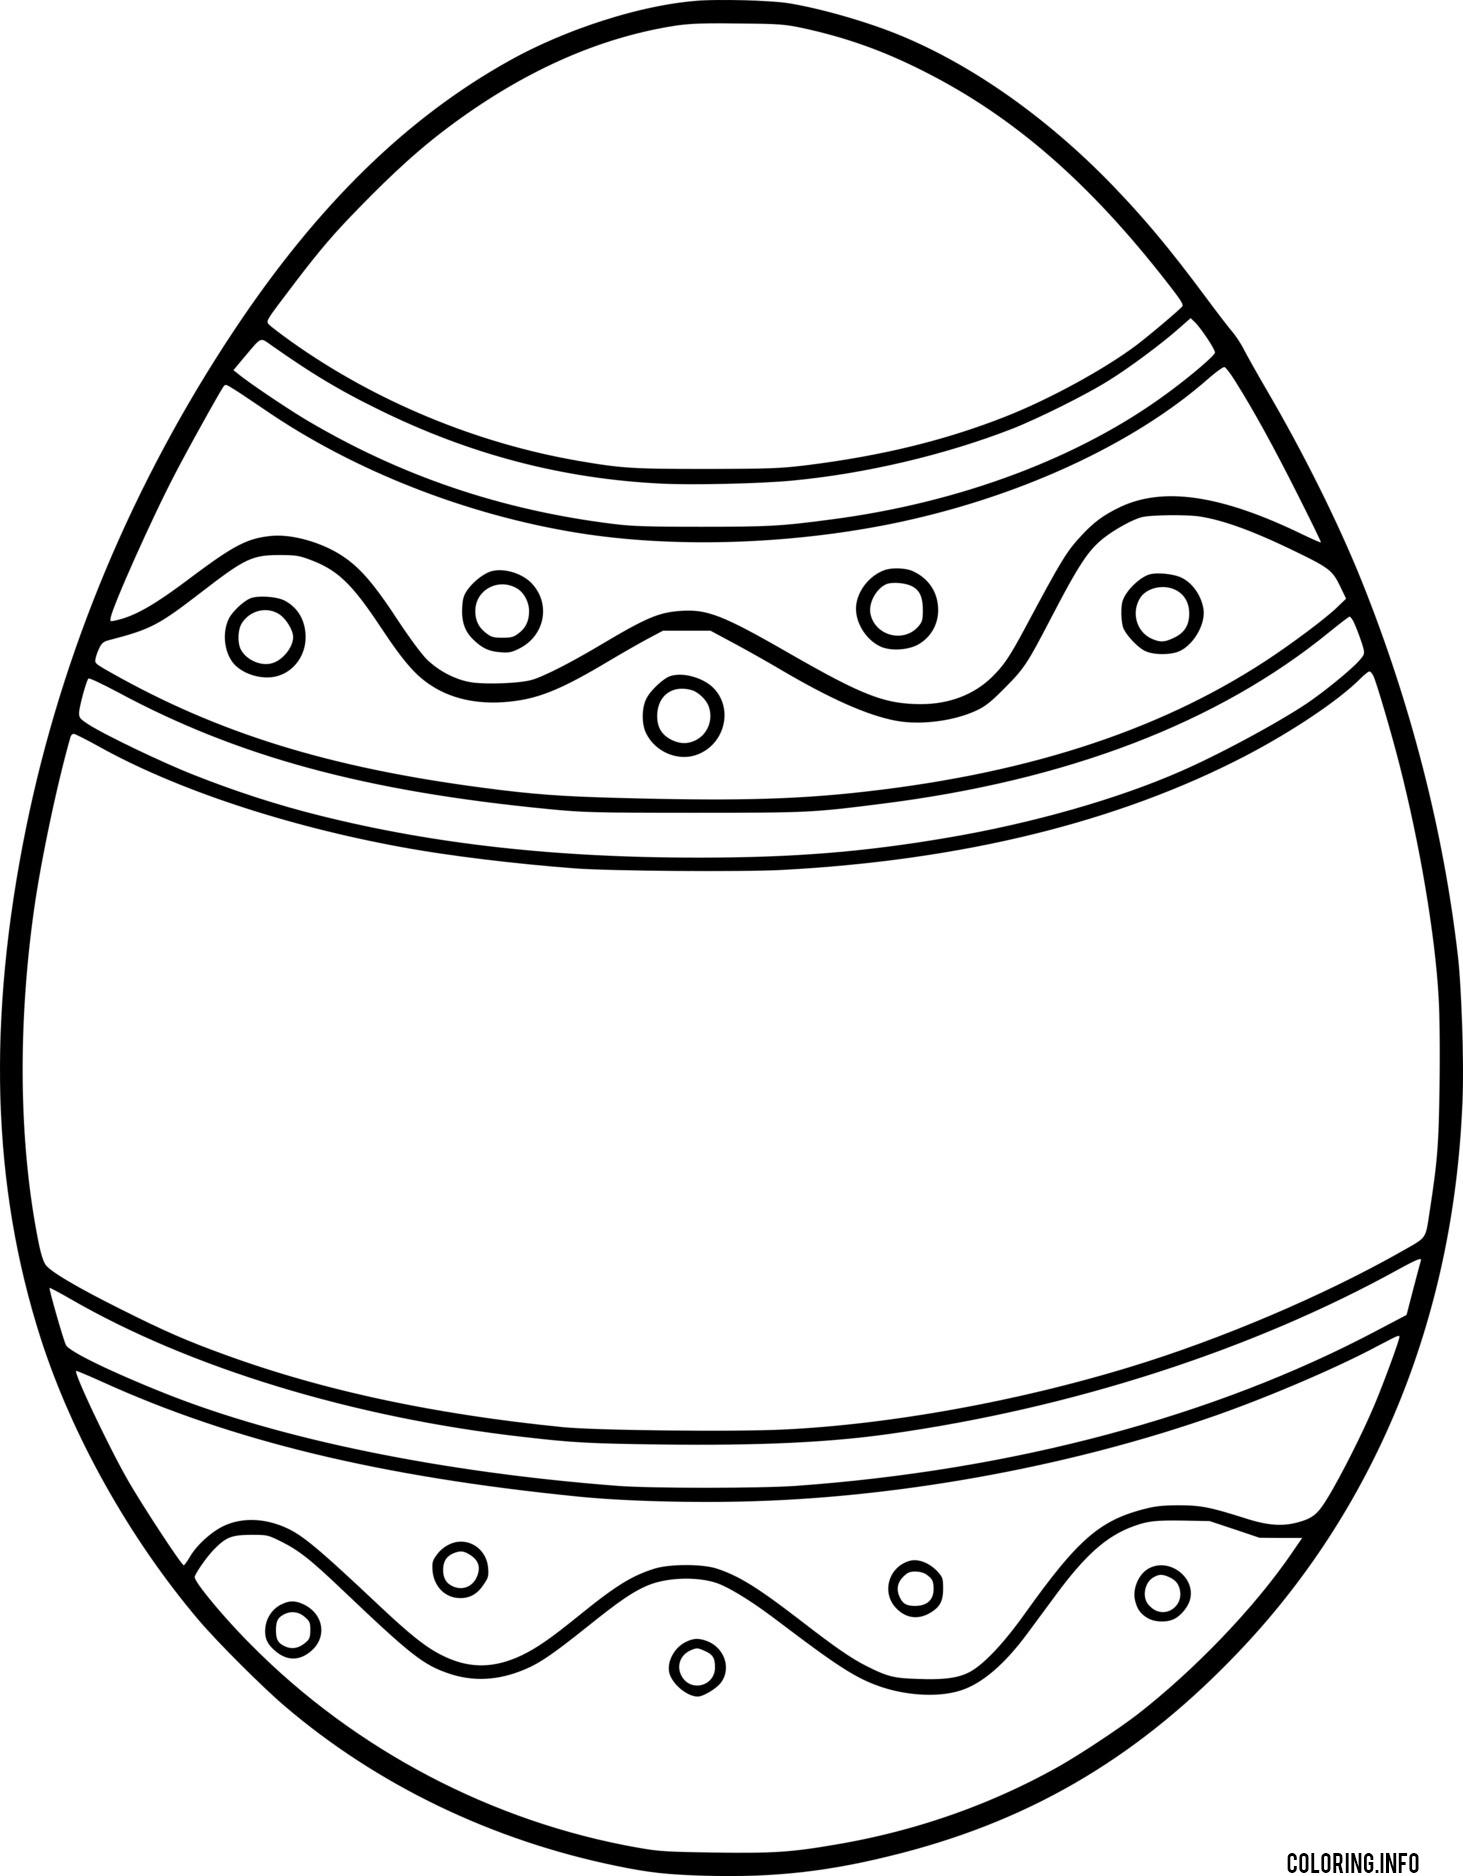 Easter Egg With Simple Patterns coloring